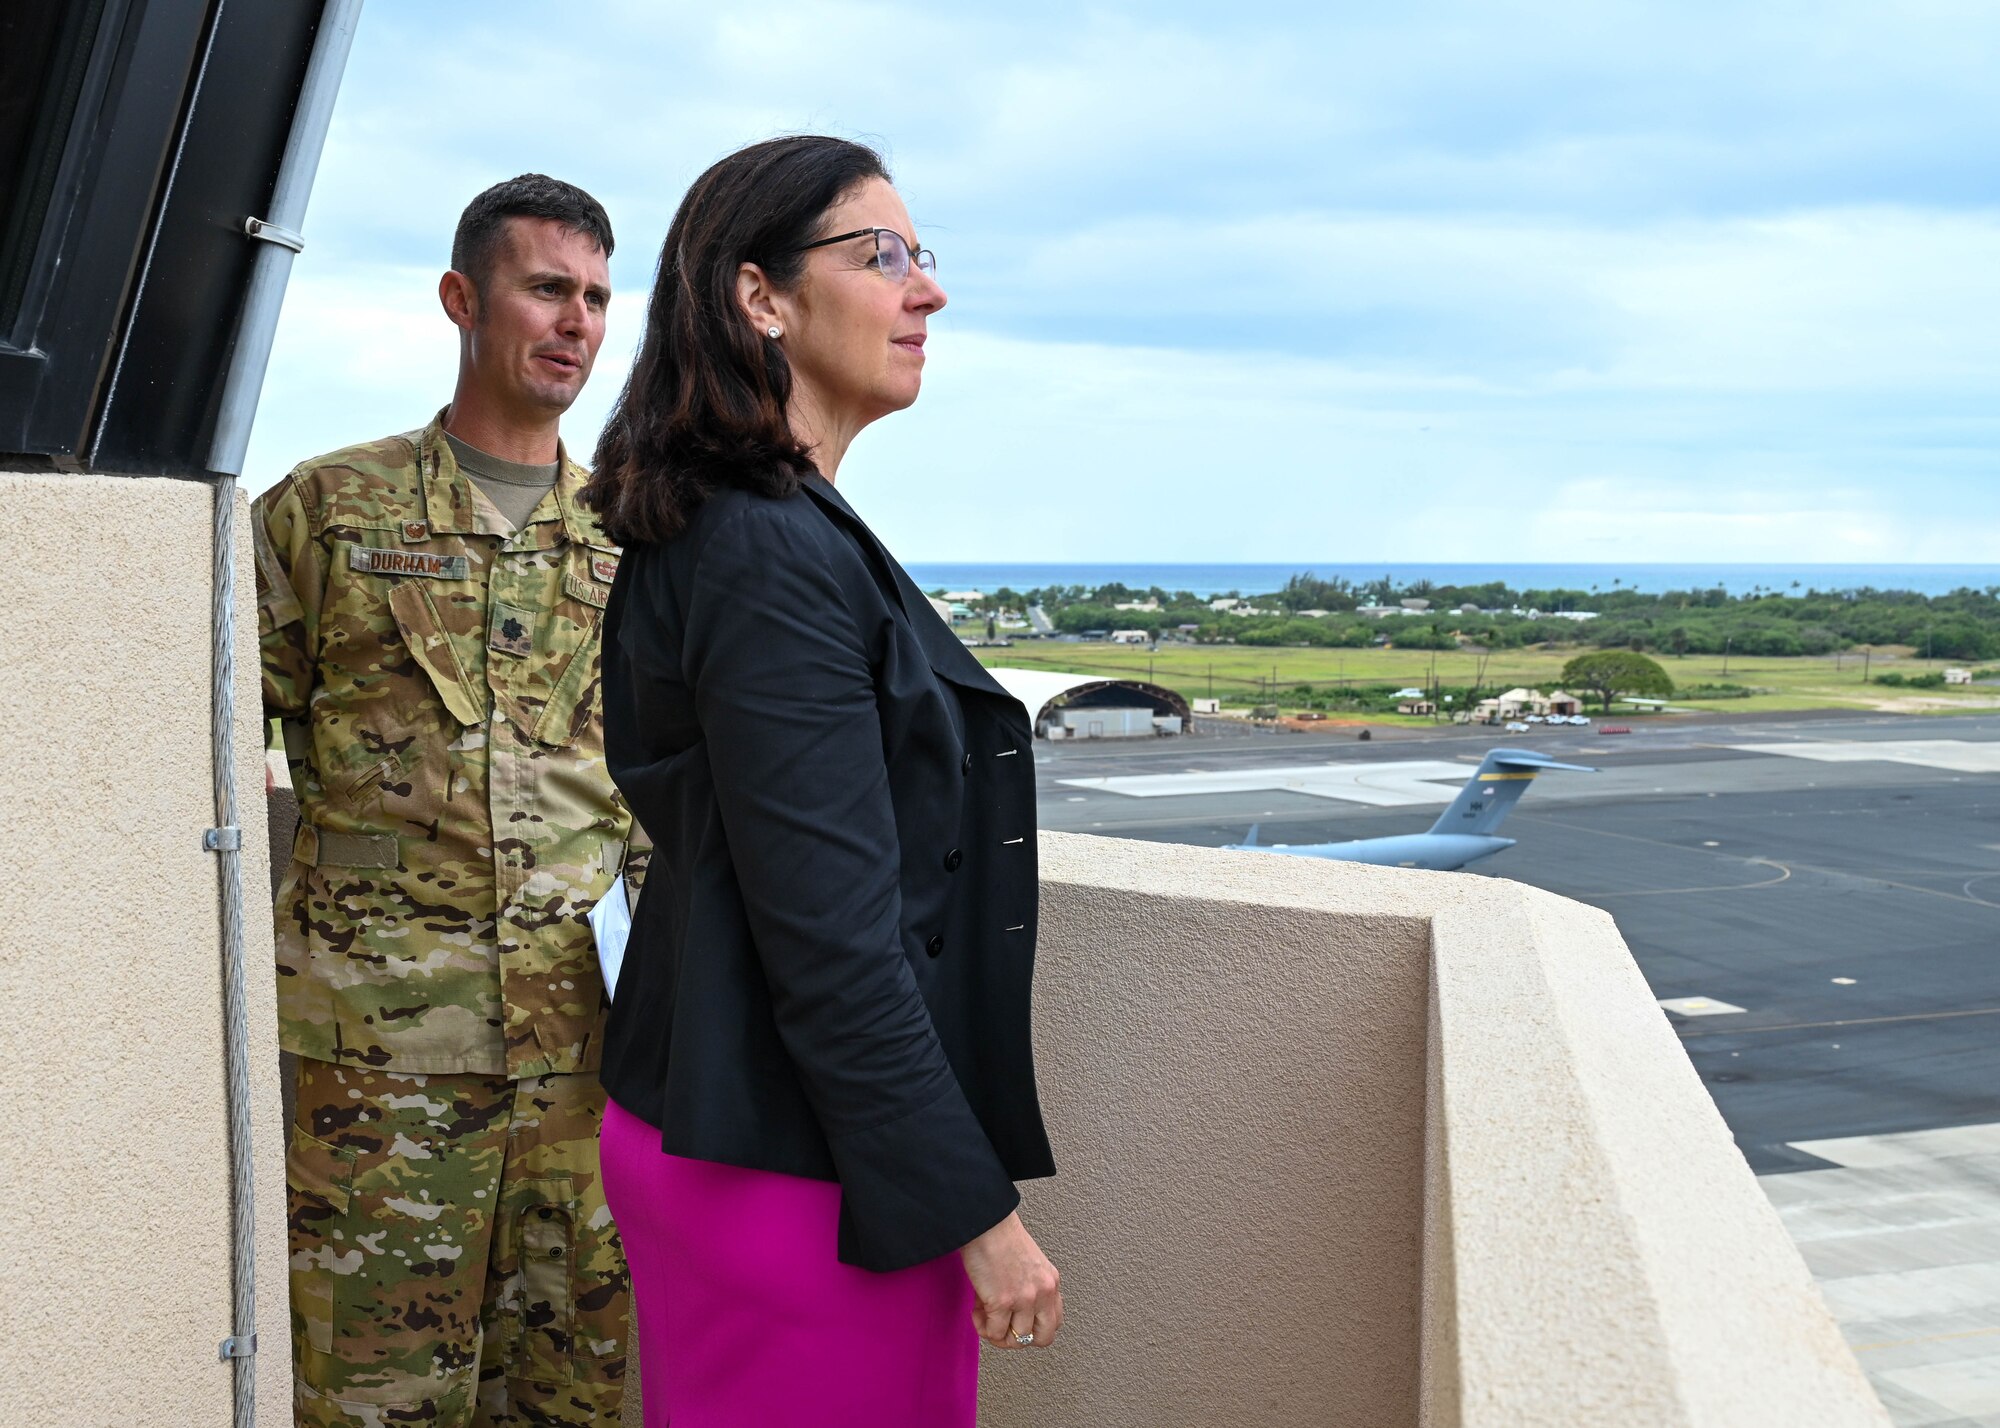 Lt. Col. Scott Durham, 15th Operational Support Squadron commander, briefs Kristyn Jones, assistant secretary of the Air Force for Financial Management and Comptroller, performing the duties of under secretary of the Air Force, on the catwalk of the Air Traffic Control Tower at Joint Base Pearl Harbor-Hickam, Hawaii, May 2, 2023. Durham shared statistics regarding the health of the Hickam Field runway and expressed thoughts on the way ahead for repairs and sustainment of the pavement. (U.S. Air Force photo by Senior Airman Zoie Cox)